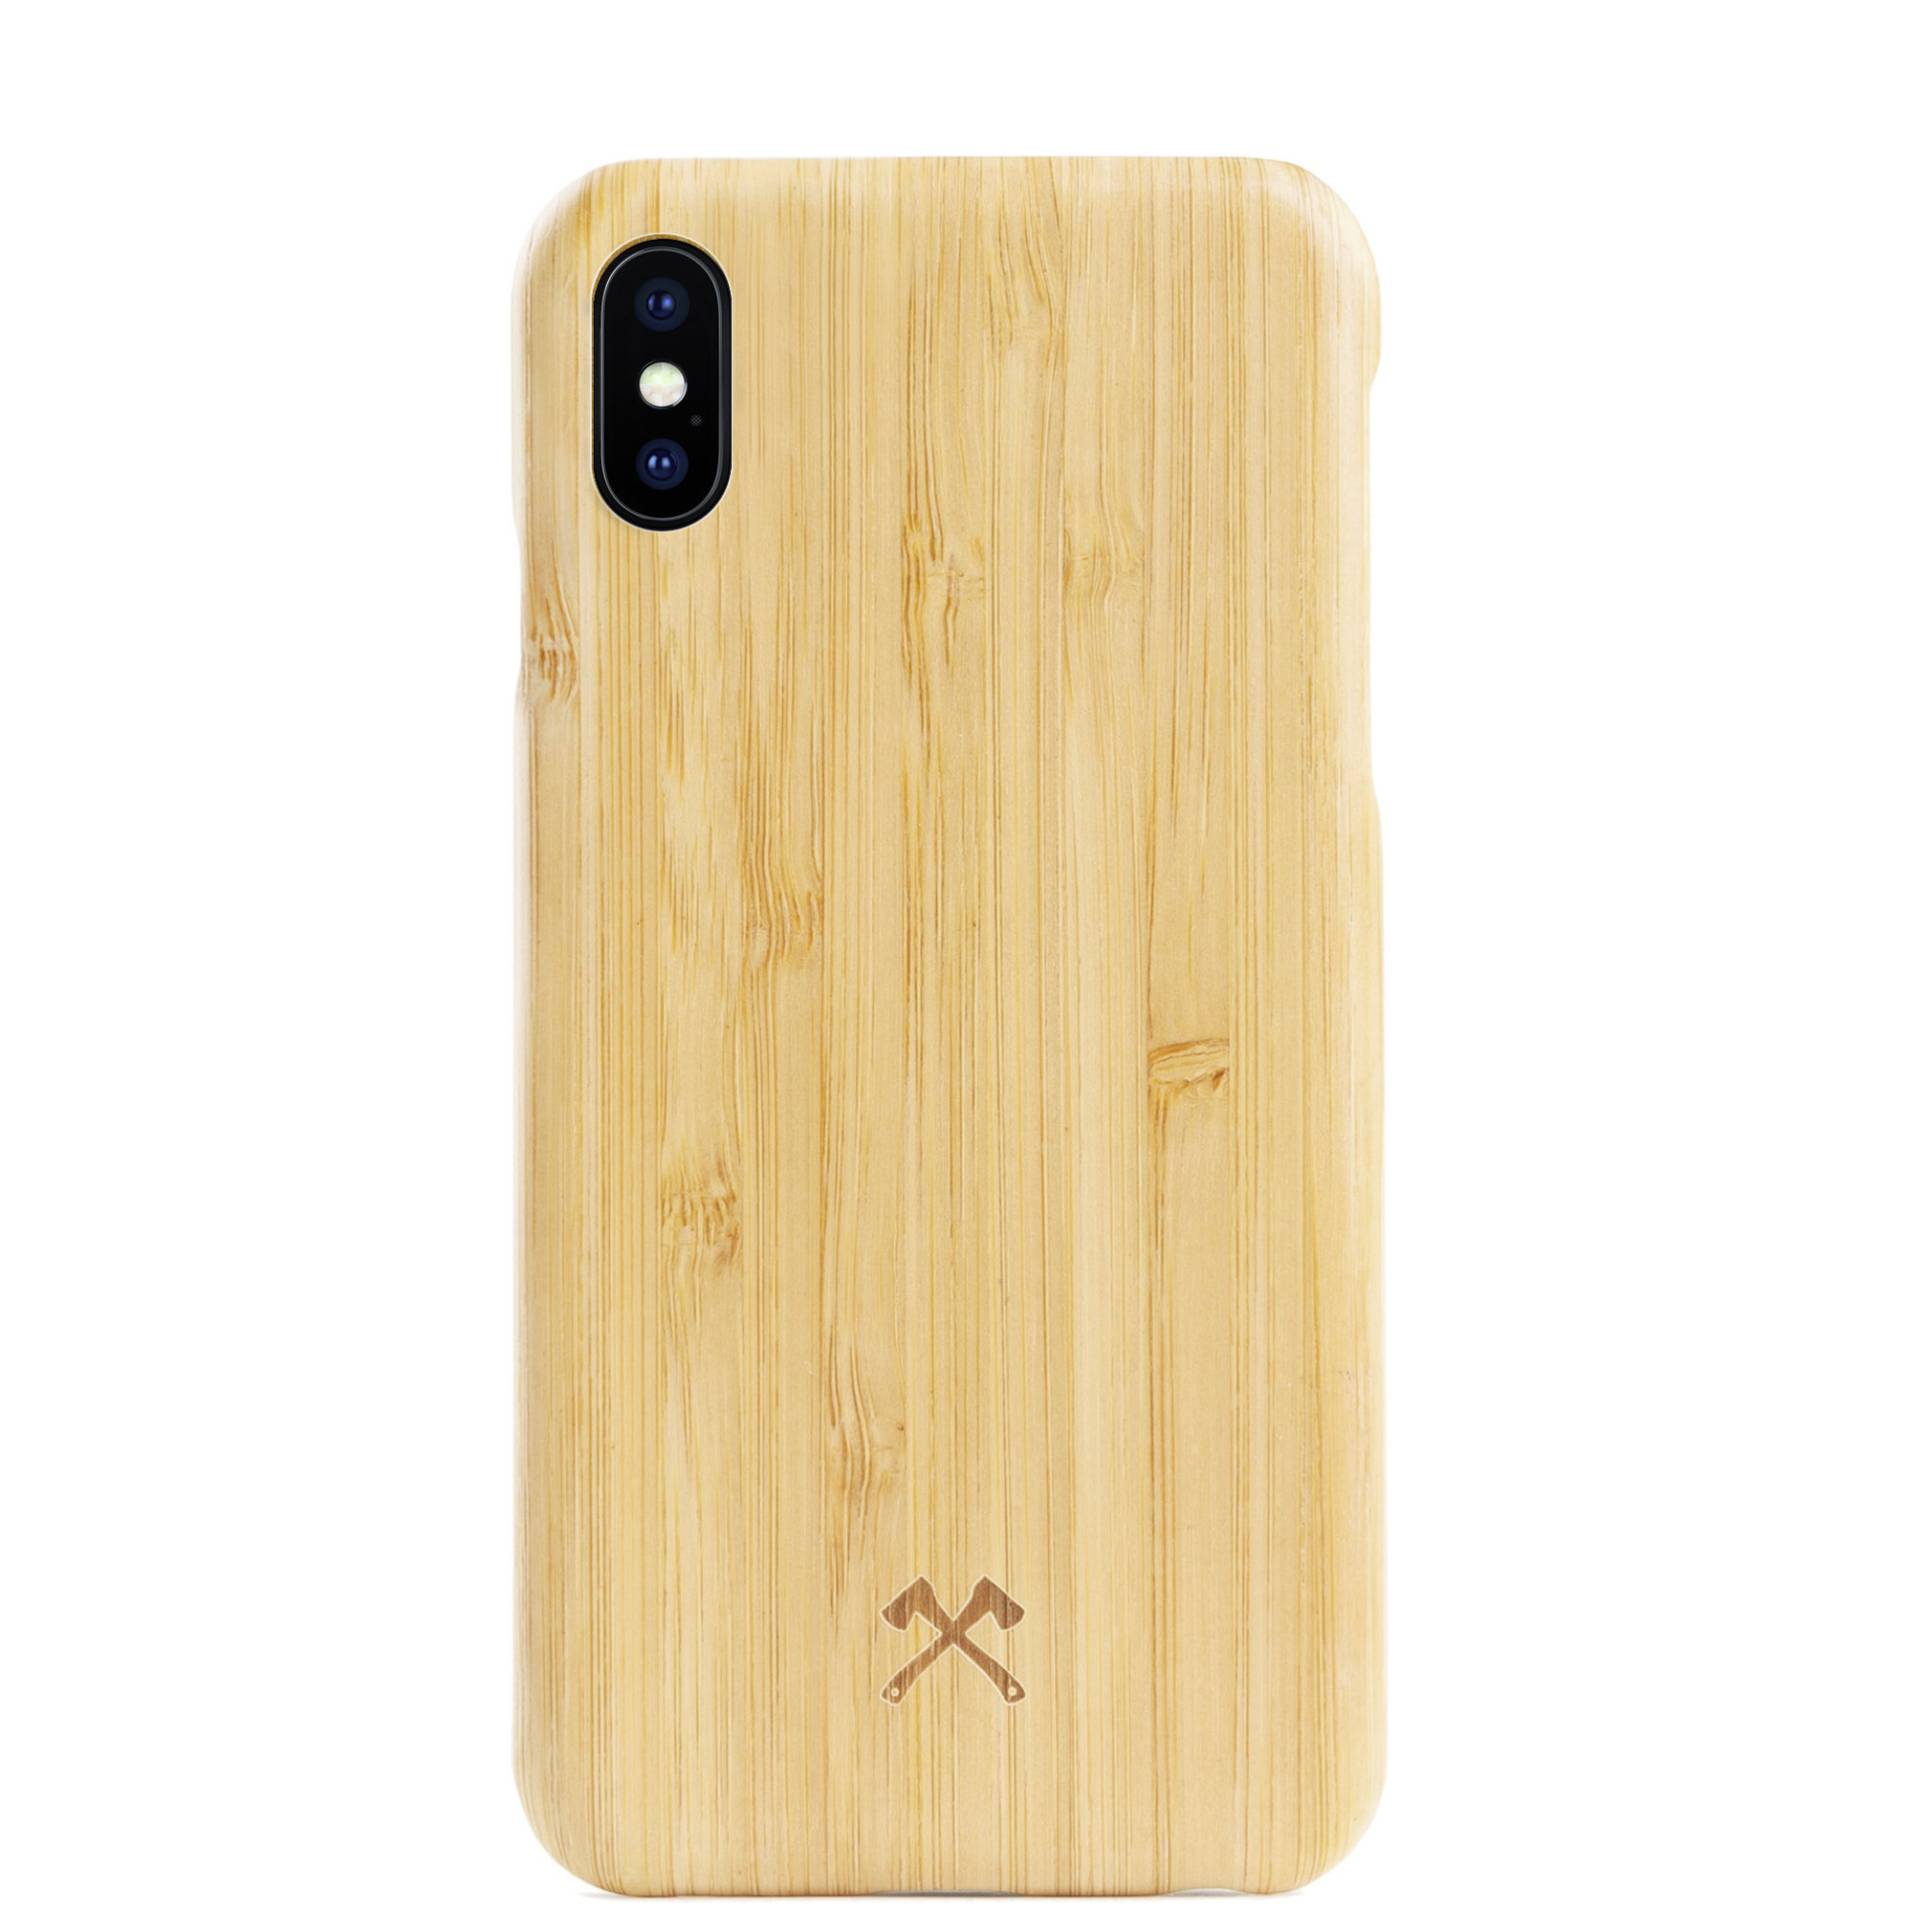 Woodcessories EcoCase Kevlar iPhone X bamboo